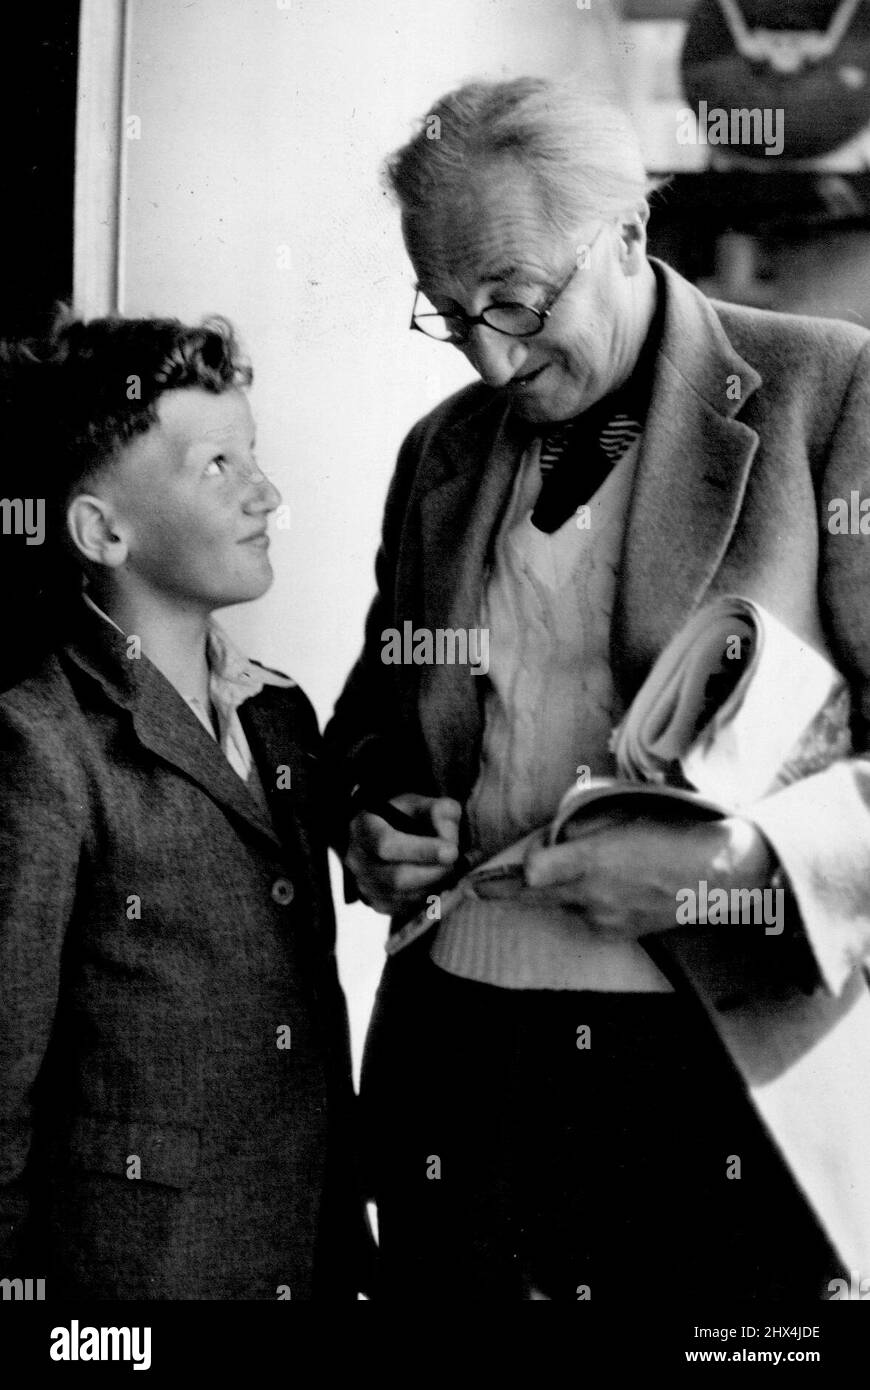 A.P.H. Gives Autograph Sir Alan Herbert, distinguished author and wit, gives his autograph to a fellow passenger, Geoffrey Thomas, on arrival in the Orcades today. November 08, 1950. Stock Photo